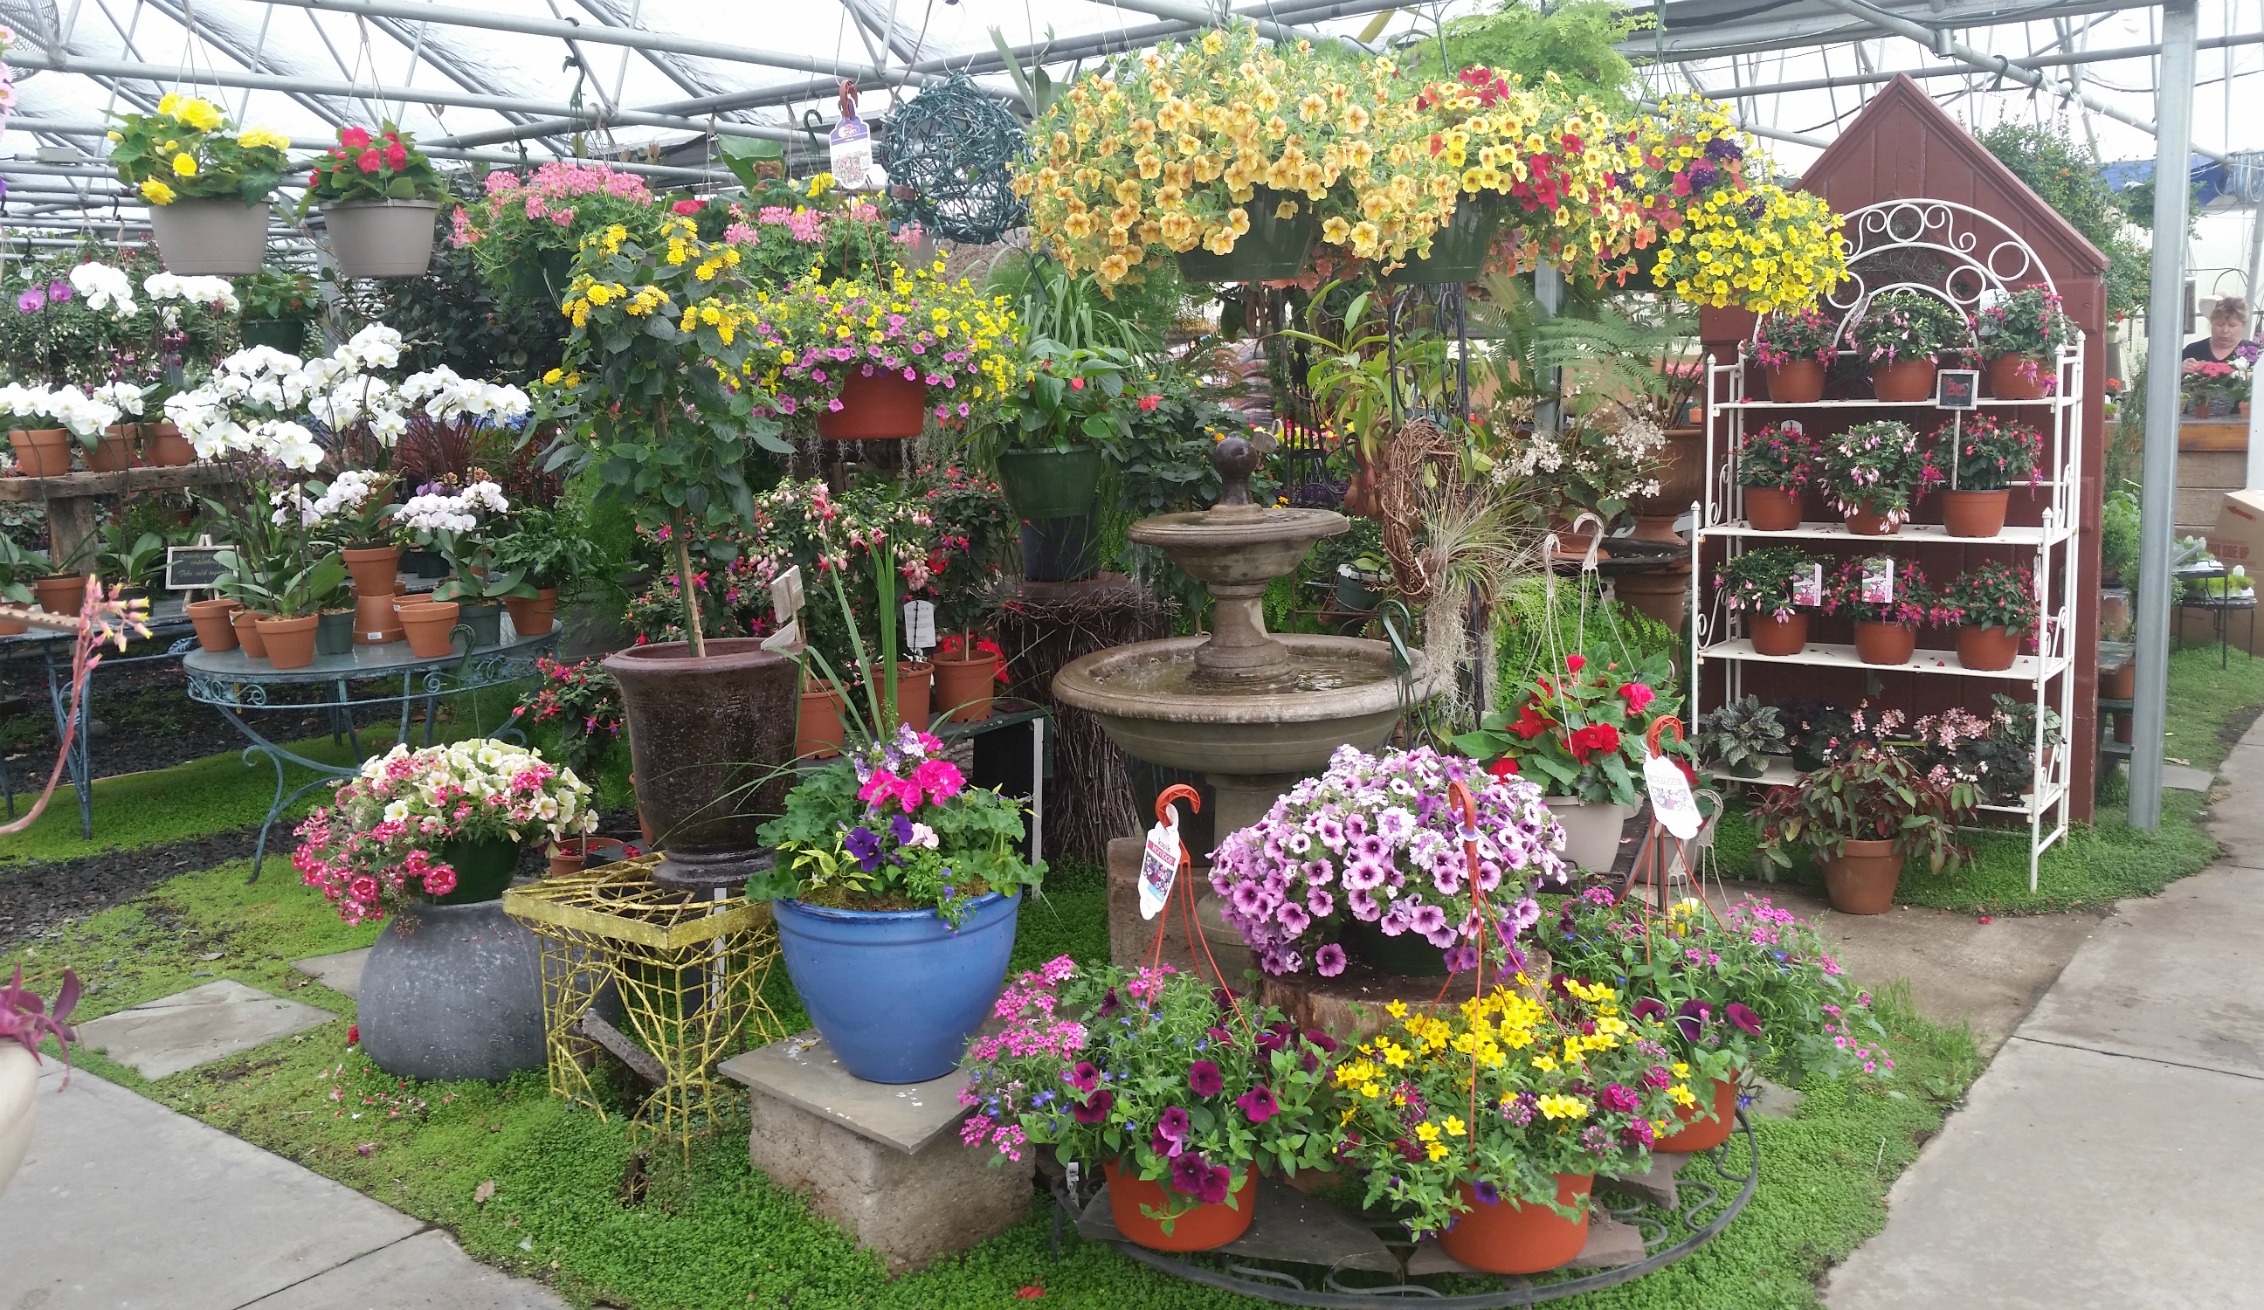 ANNUAL BLOOMING PLANTS IN GREENHOUSE